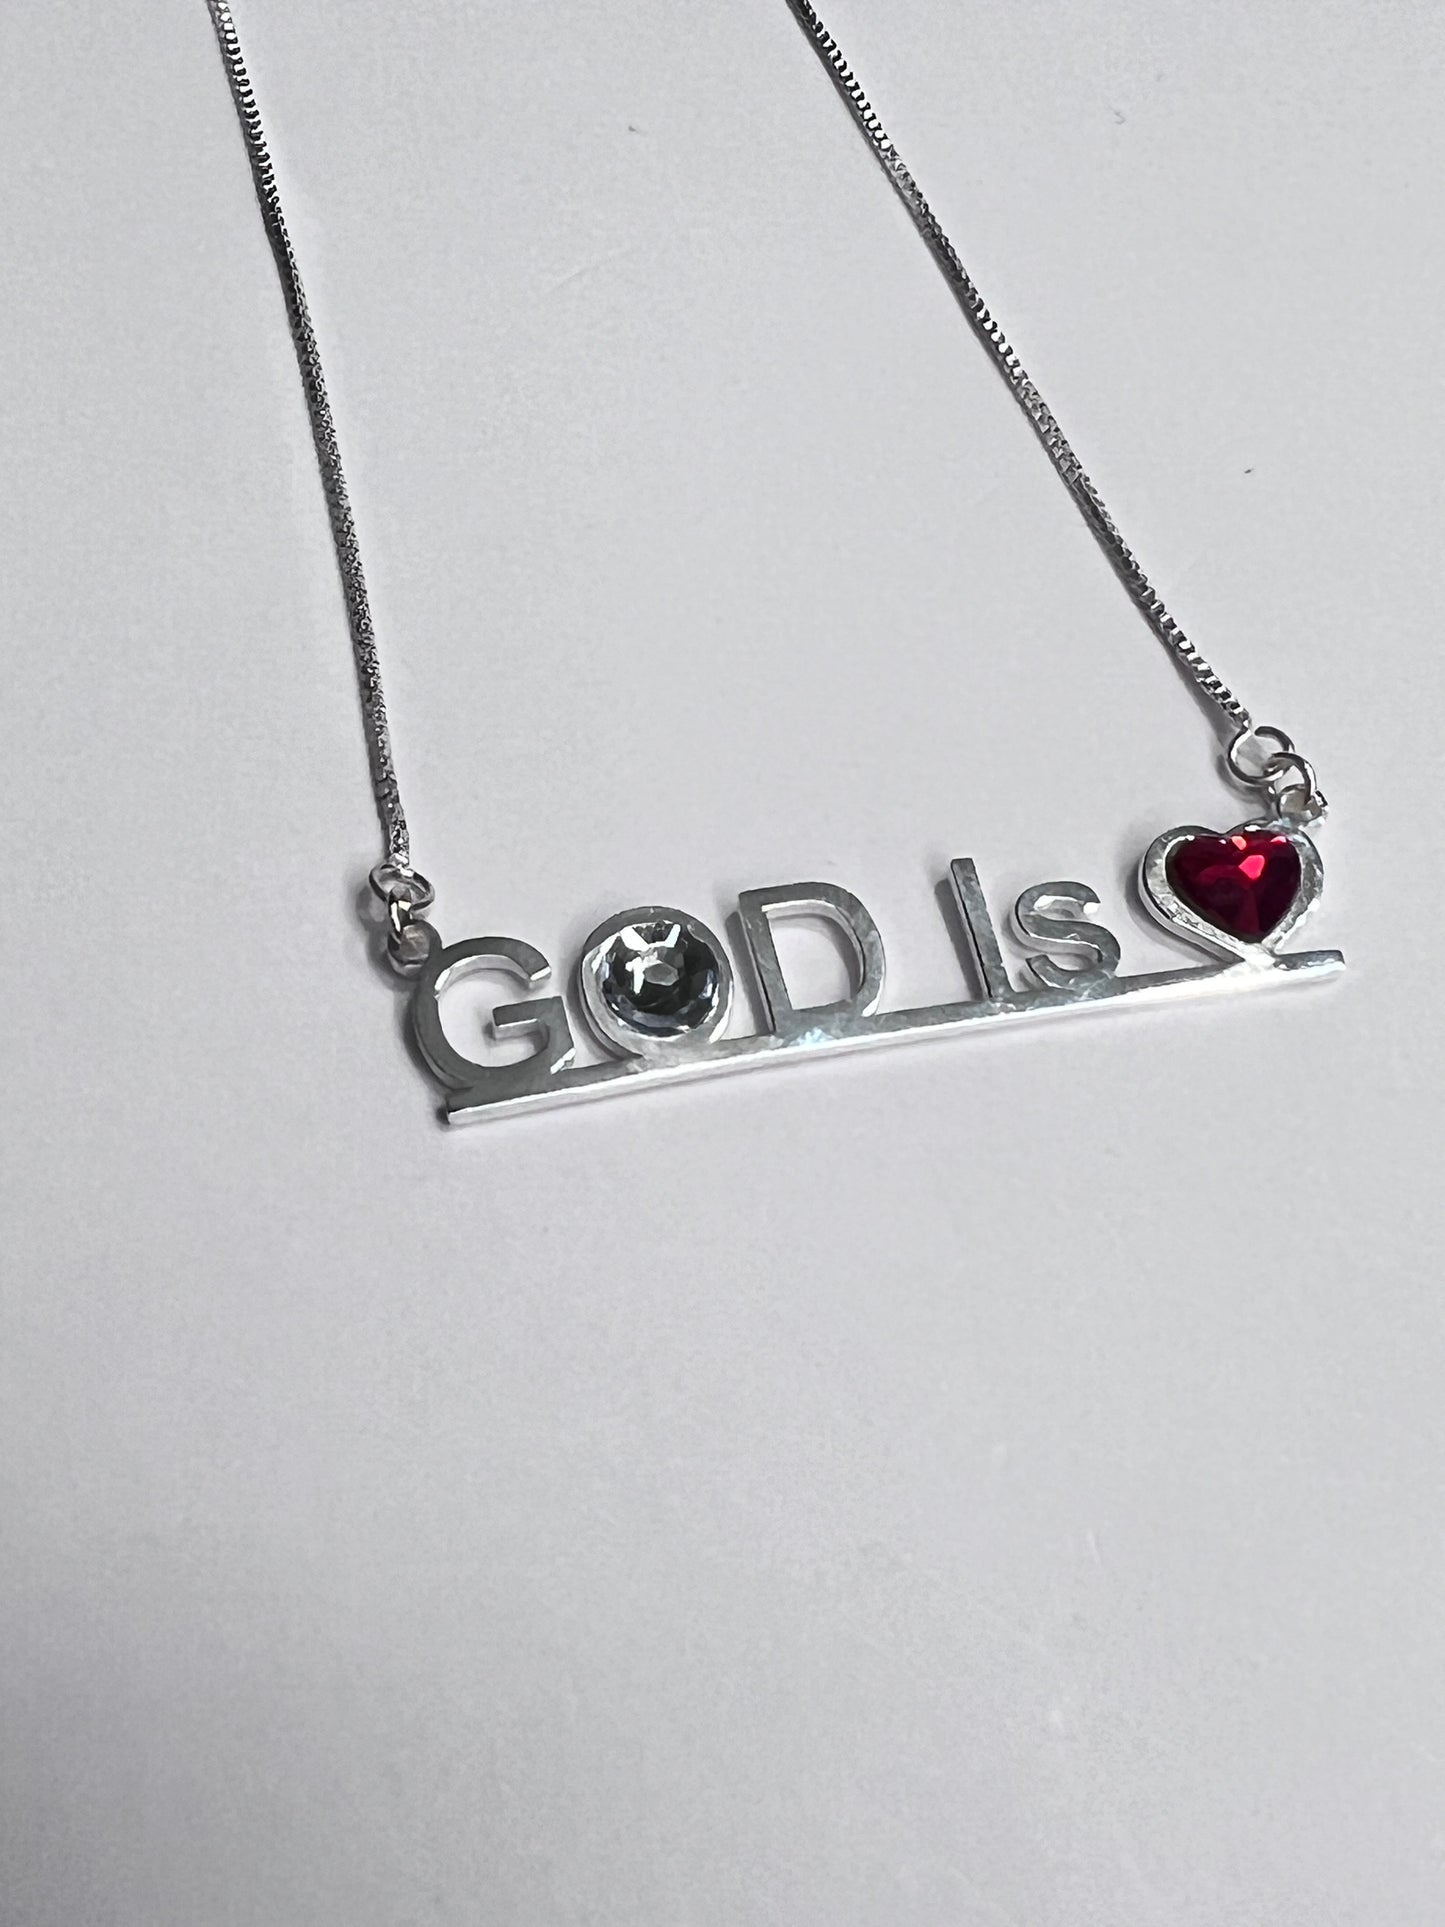 God Is ❤️Necklace (Just In)